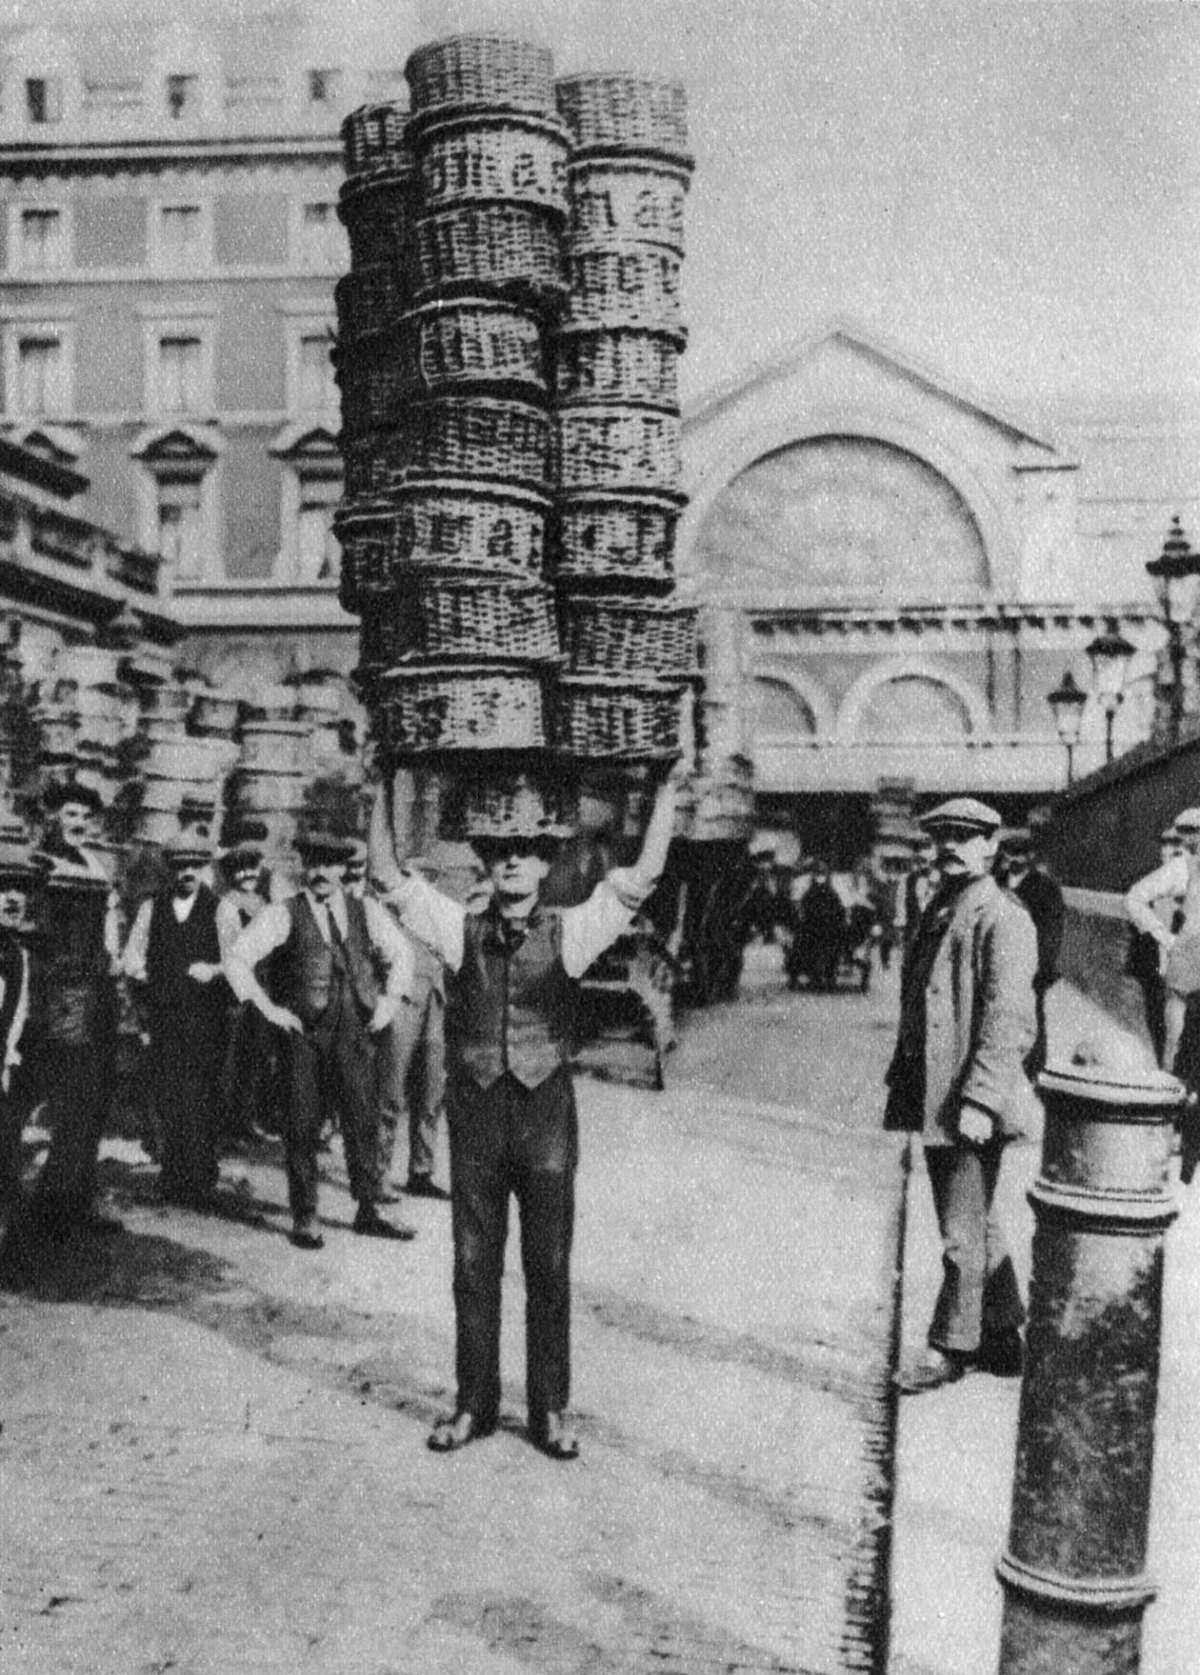 A porter carrying many baskets on his head, 1926.